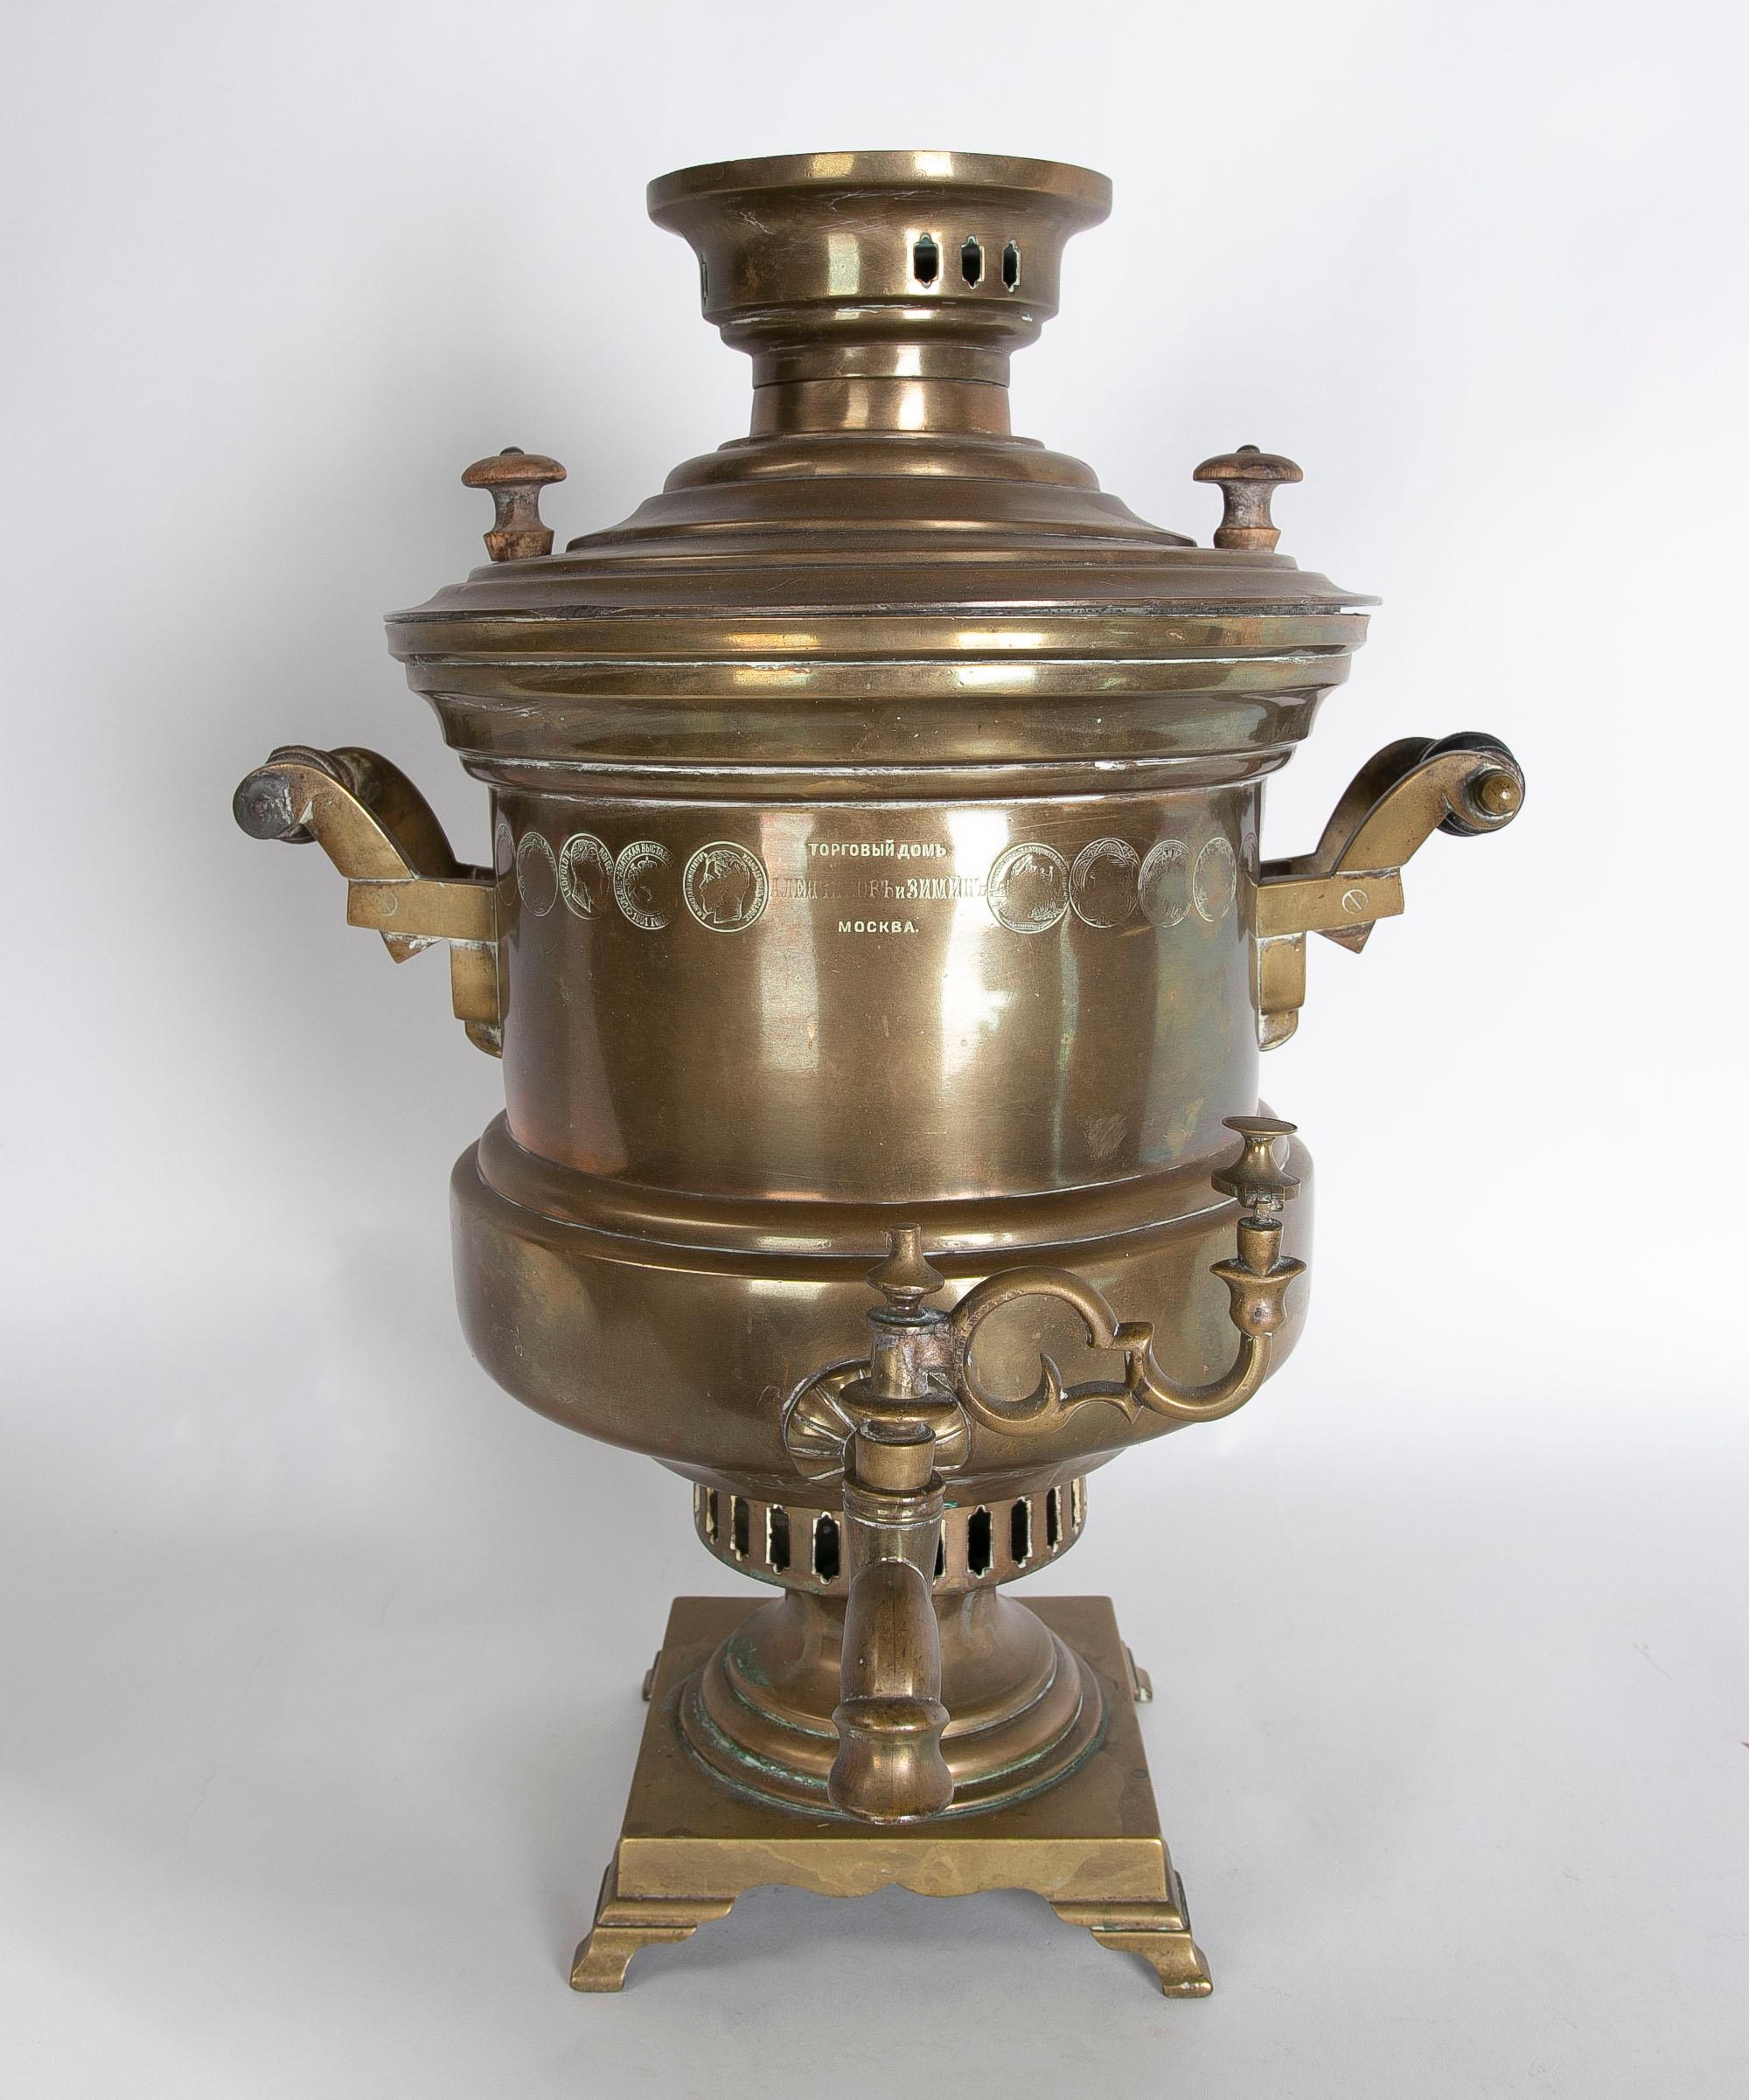 1960s Russian brass samovar with wooden handles.